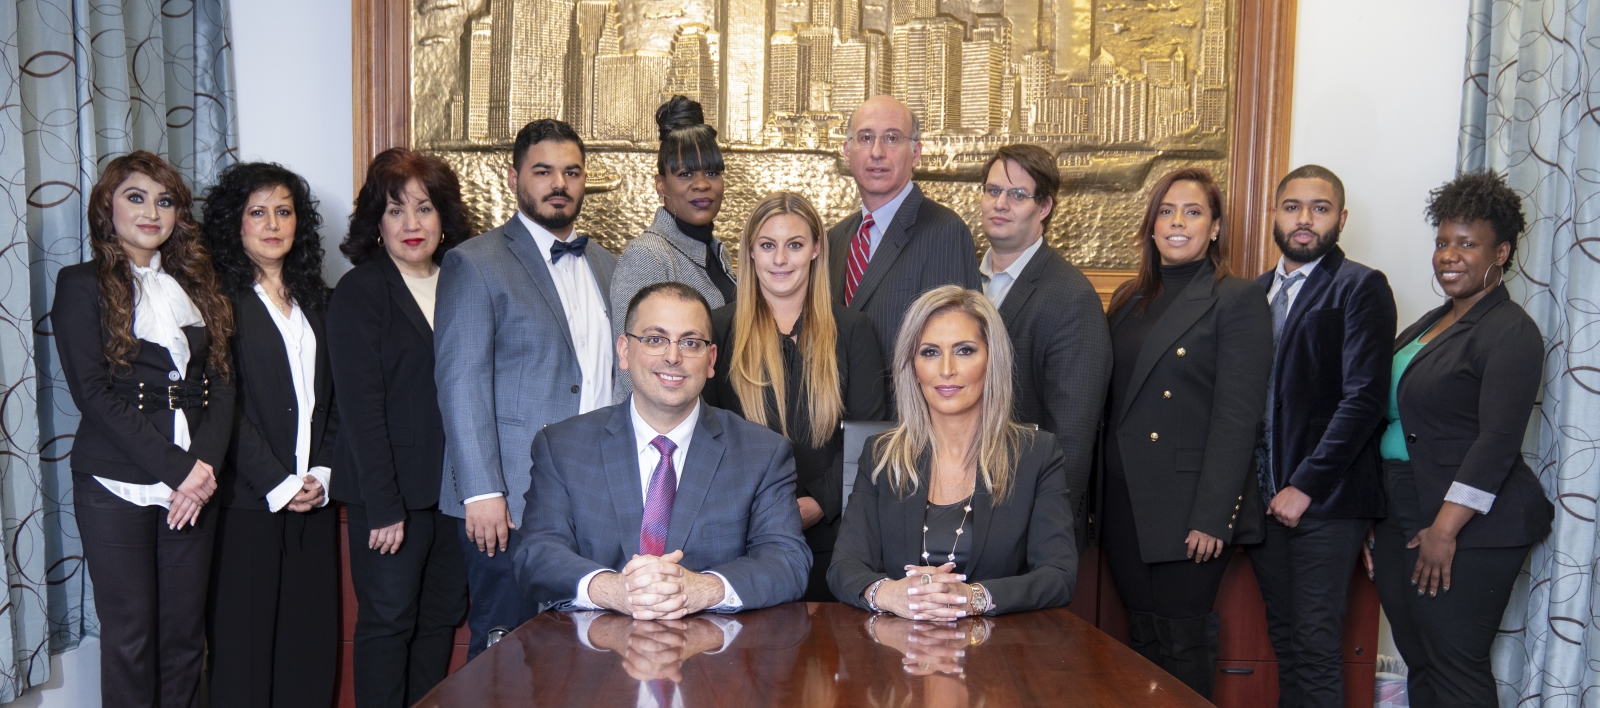 Levi Law staff of NYC's personal injury law firm